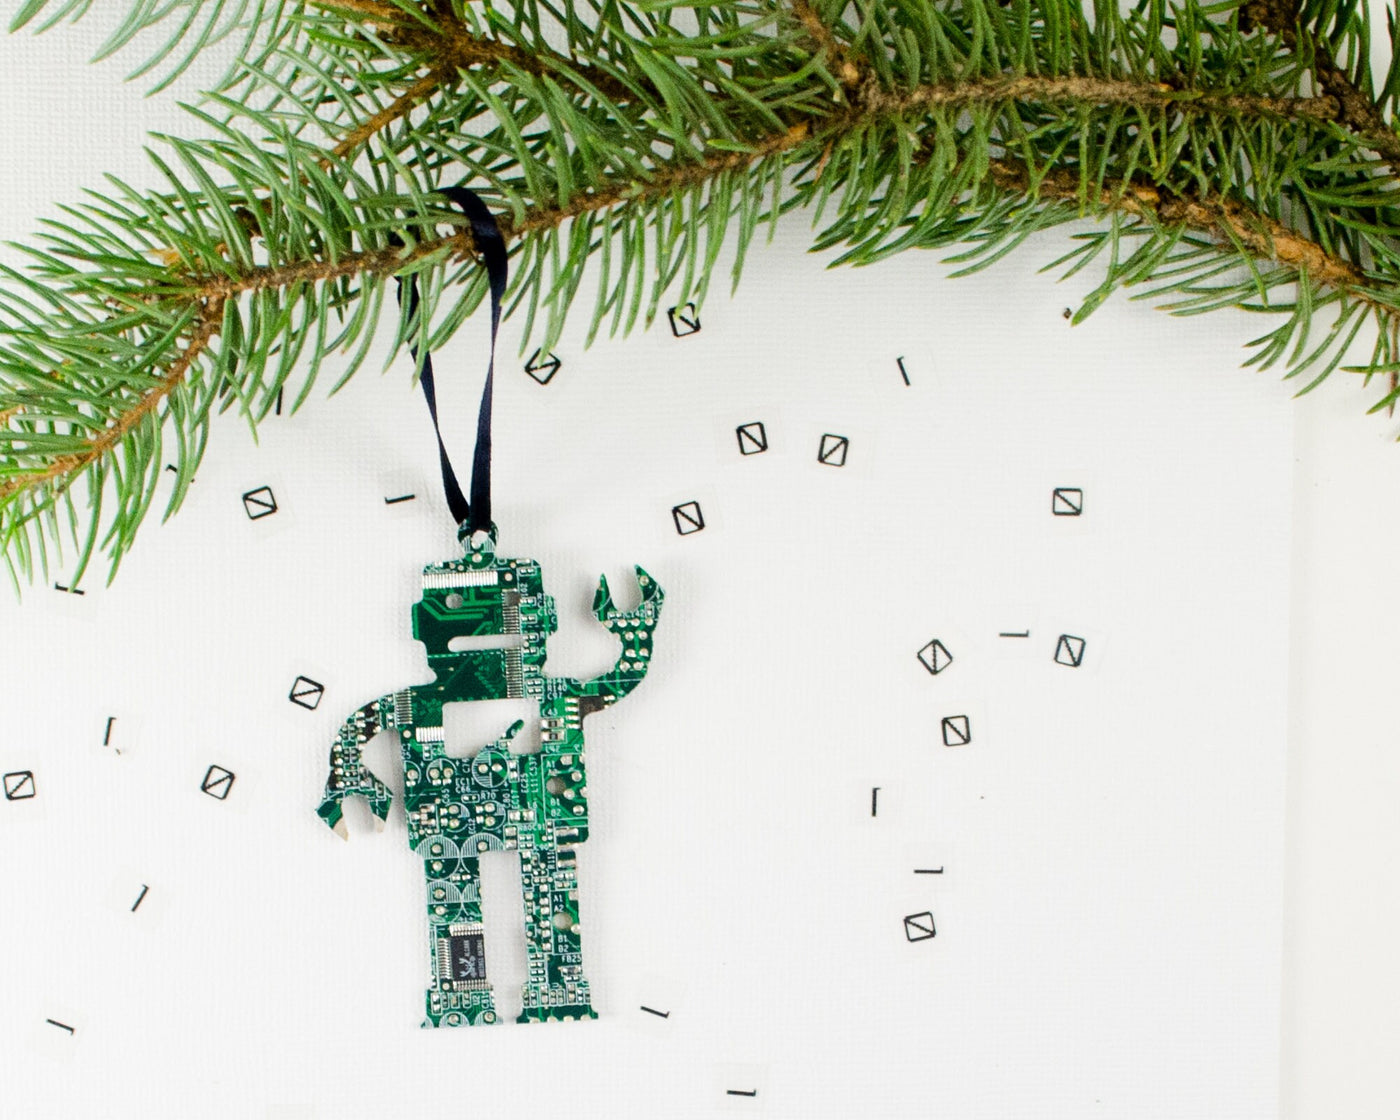 Circuit Board Robot Ornament, Computer Programmer, Software Engineer, Computer Science Gift, Christmas Ornament, Techie Stocking Stuffer